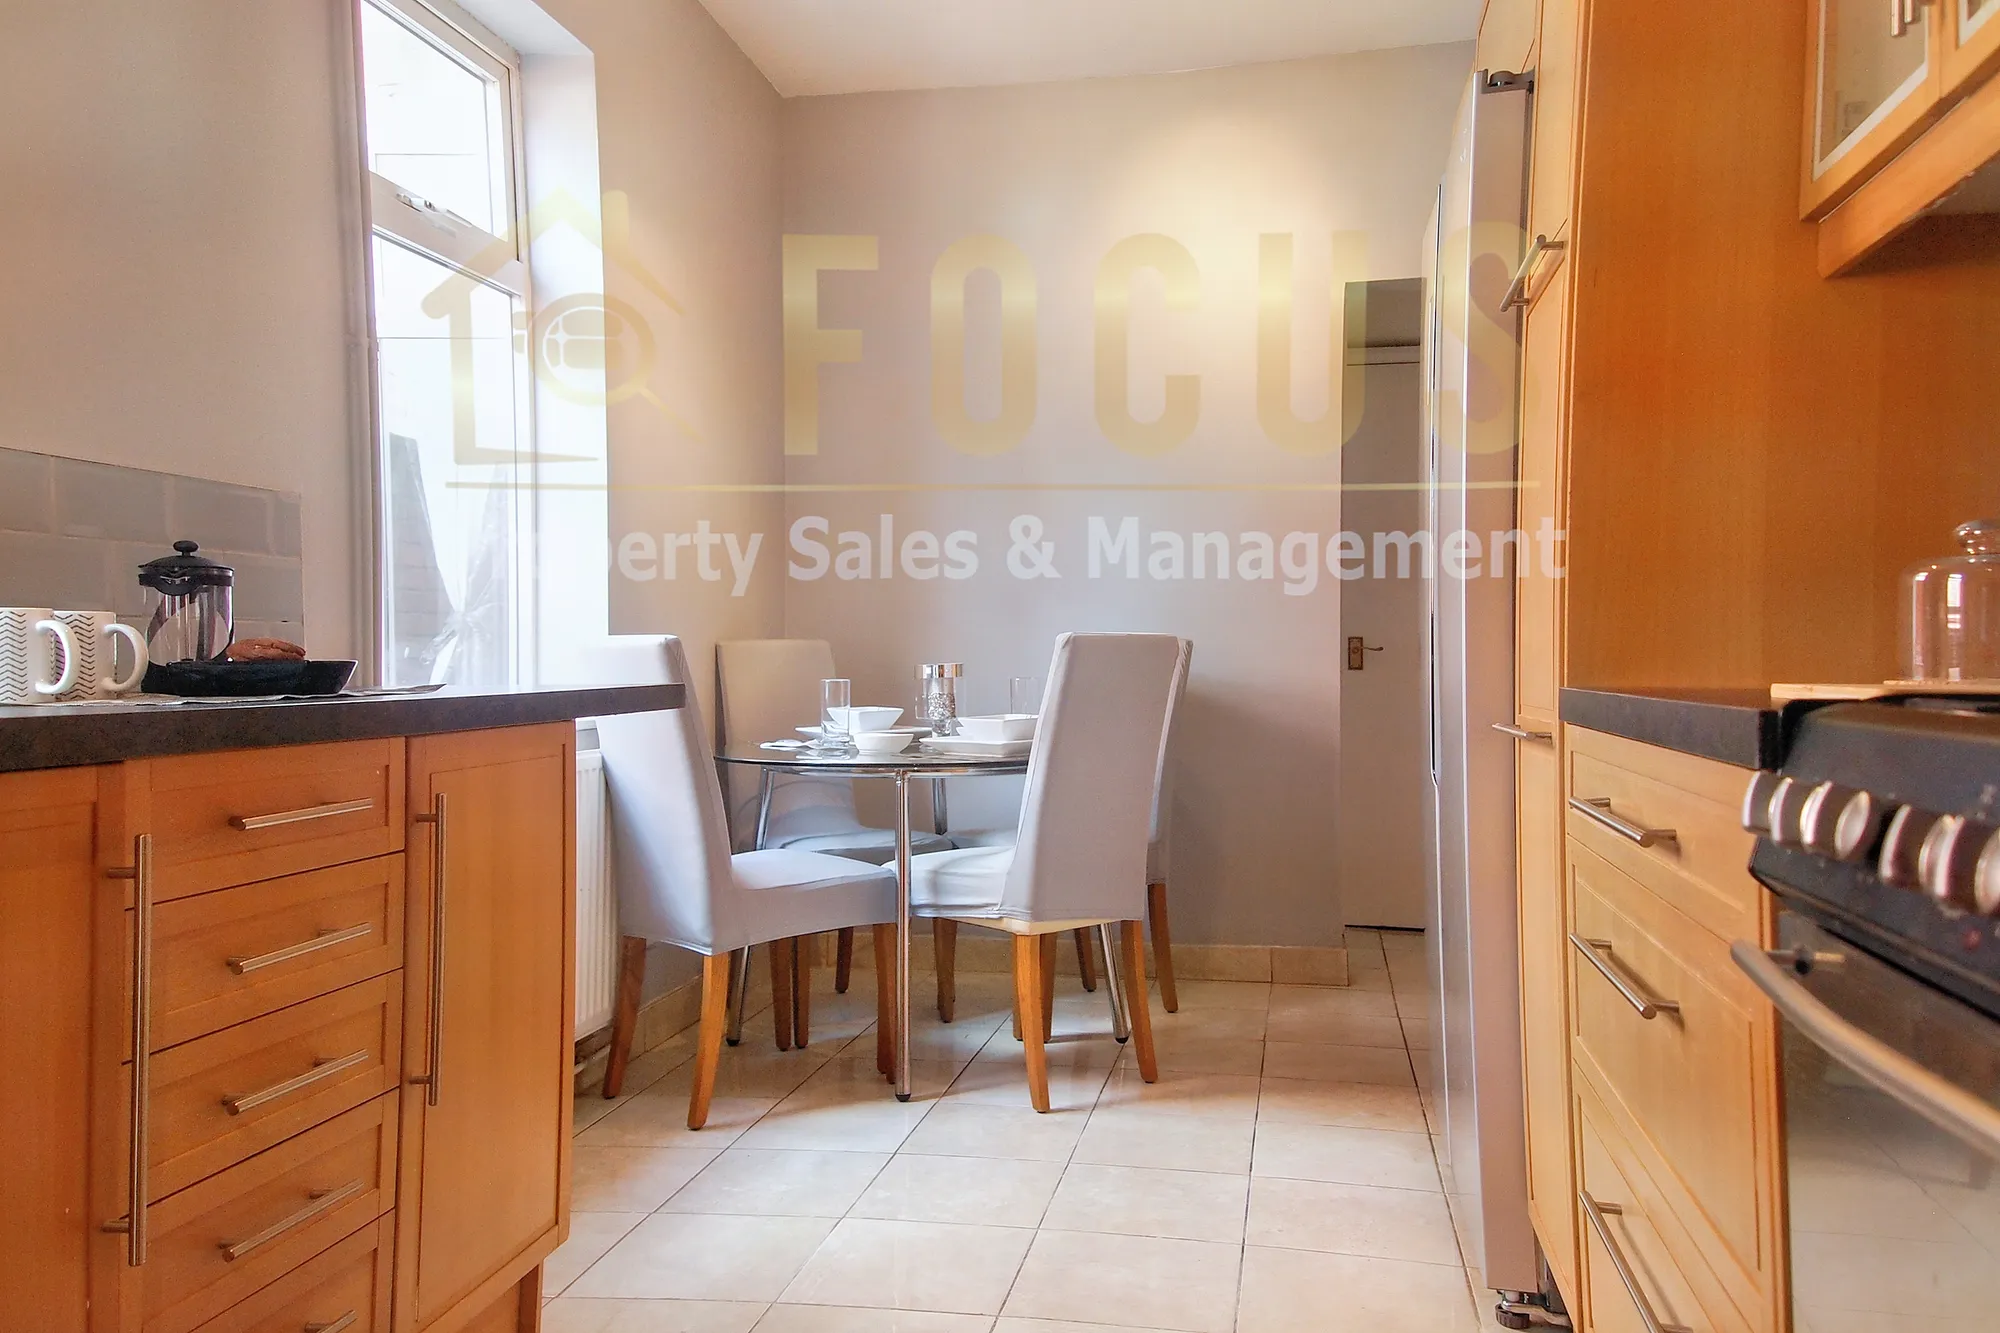 5 bed mid-terraced house to rent in Kimberley Road, Leicester  - Property Image 7